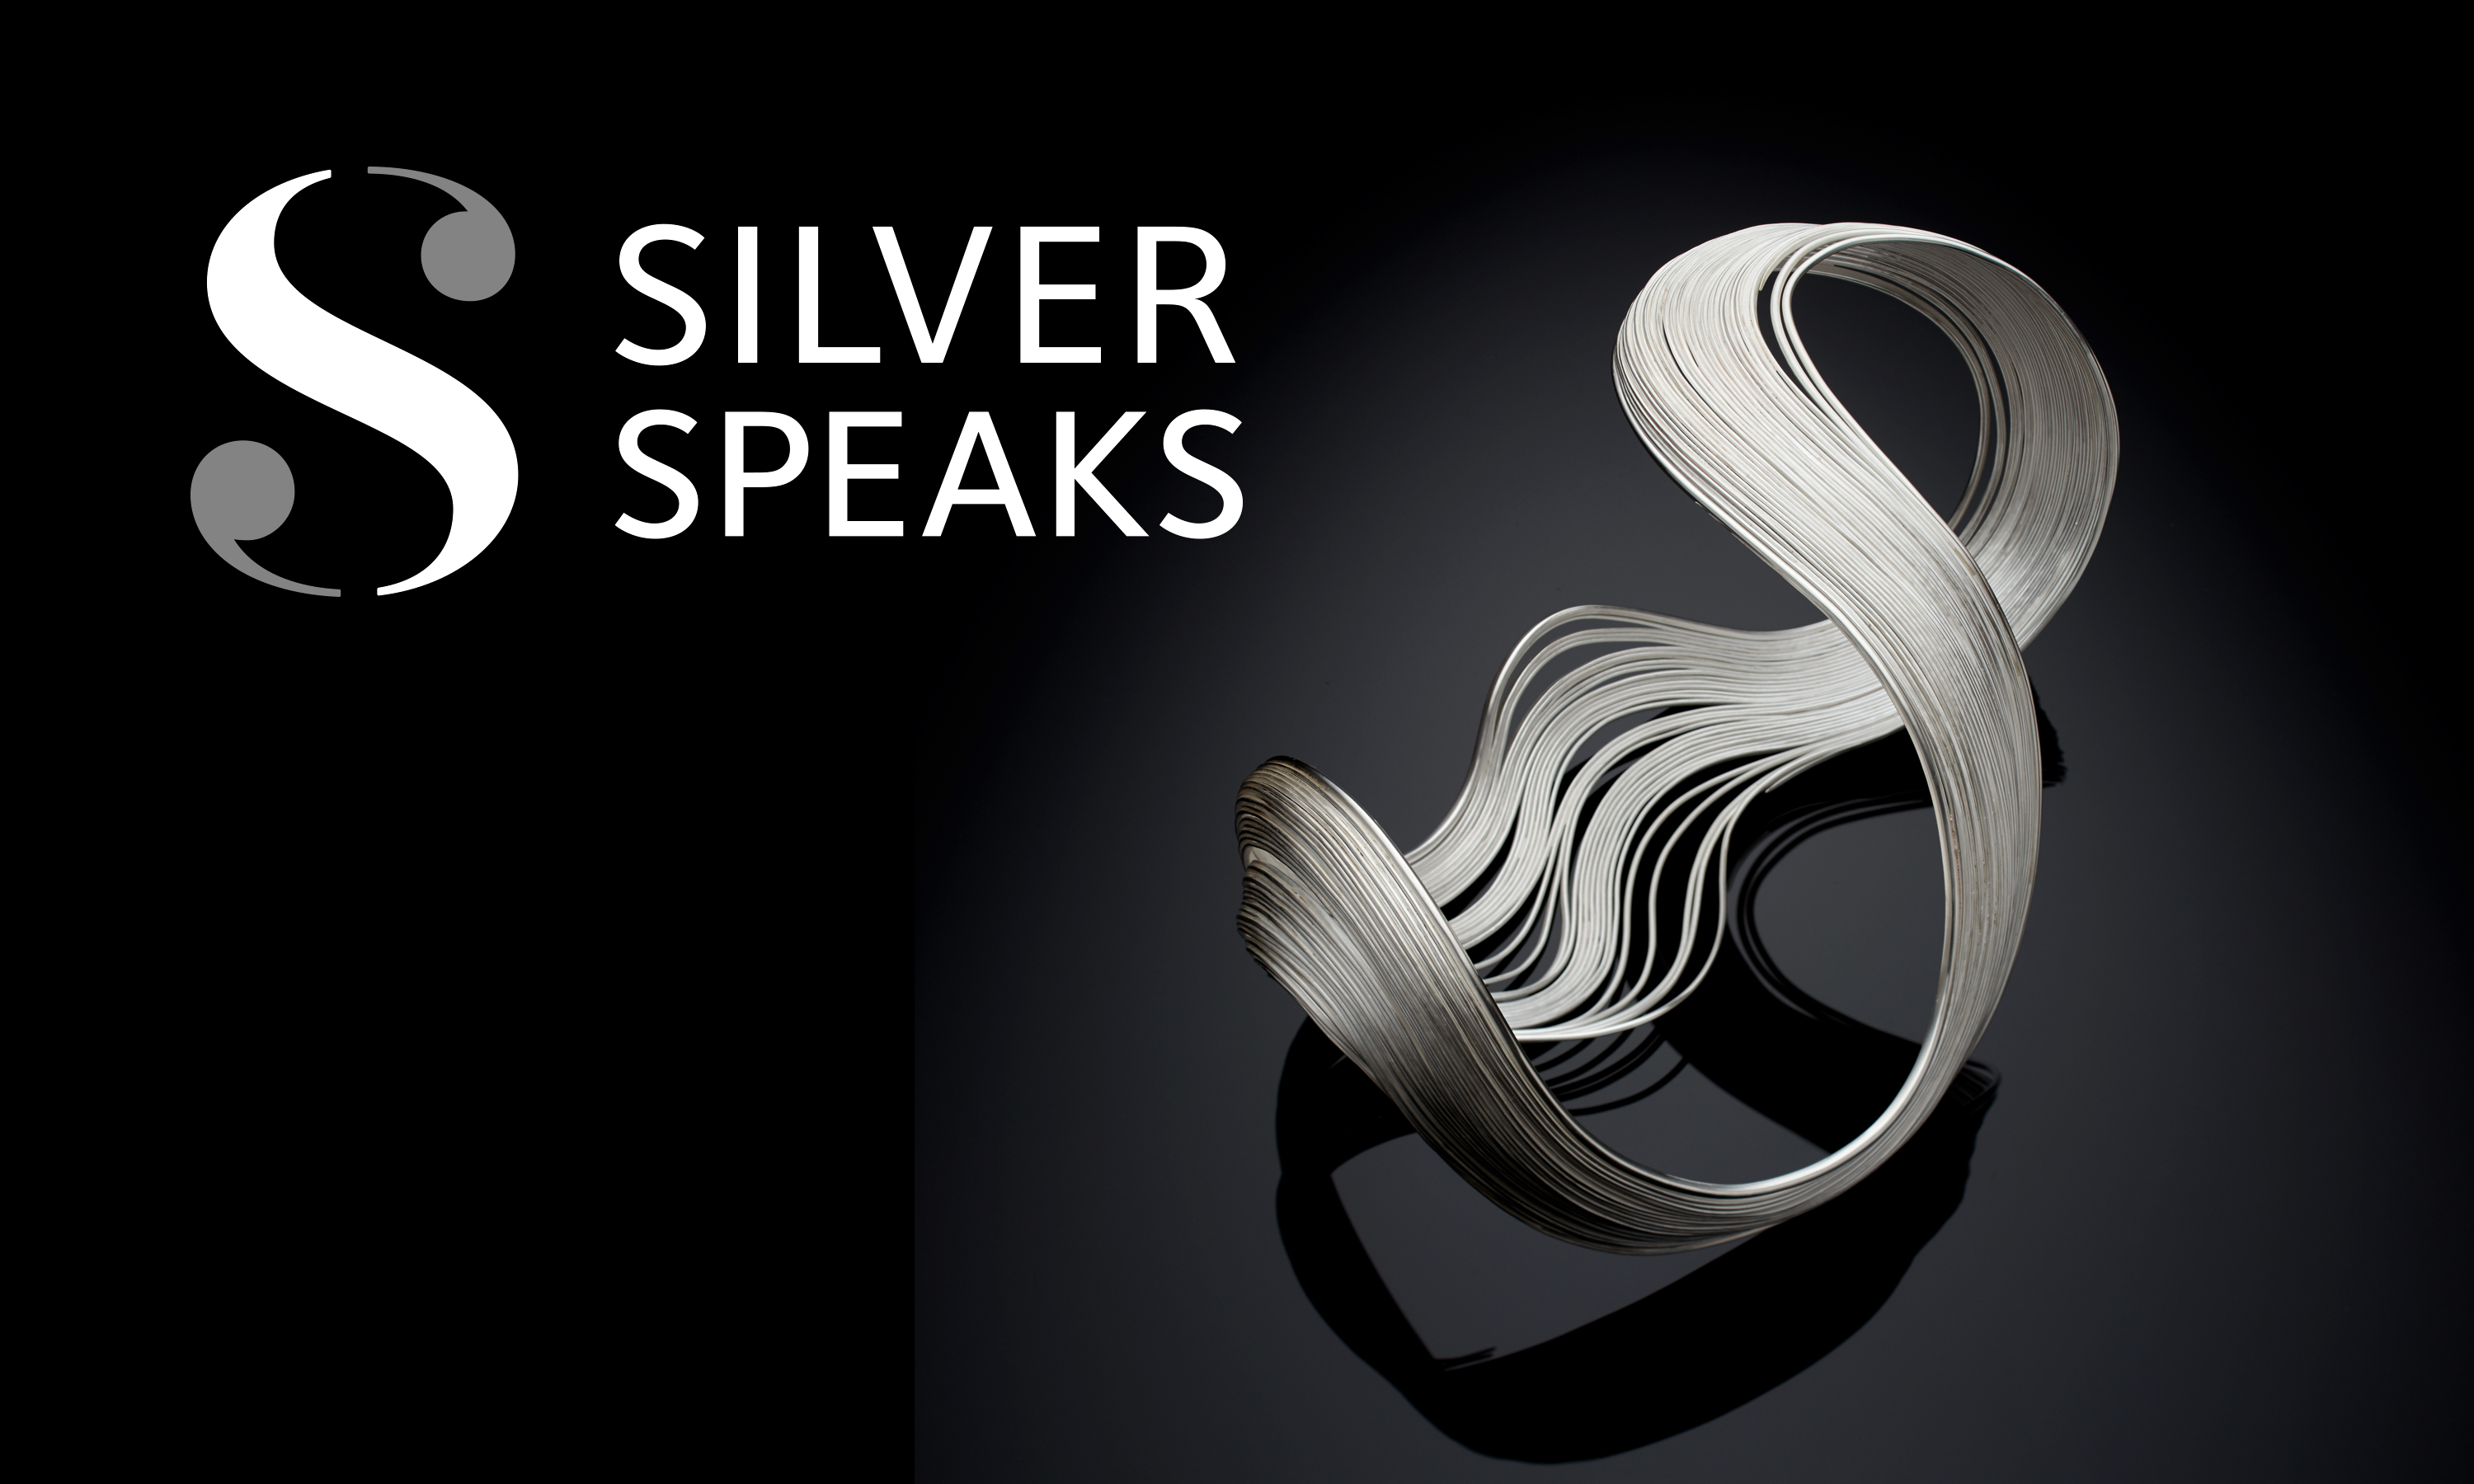 Branding and website design by Neon - designed by Dana Robertson - Silver Speaks exhibition logo with piece of silver work